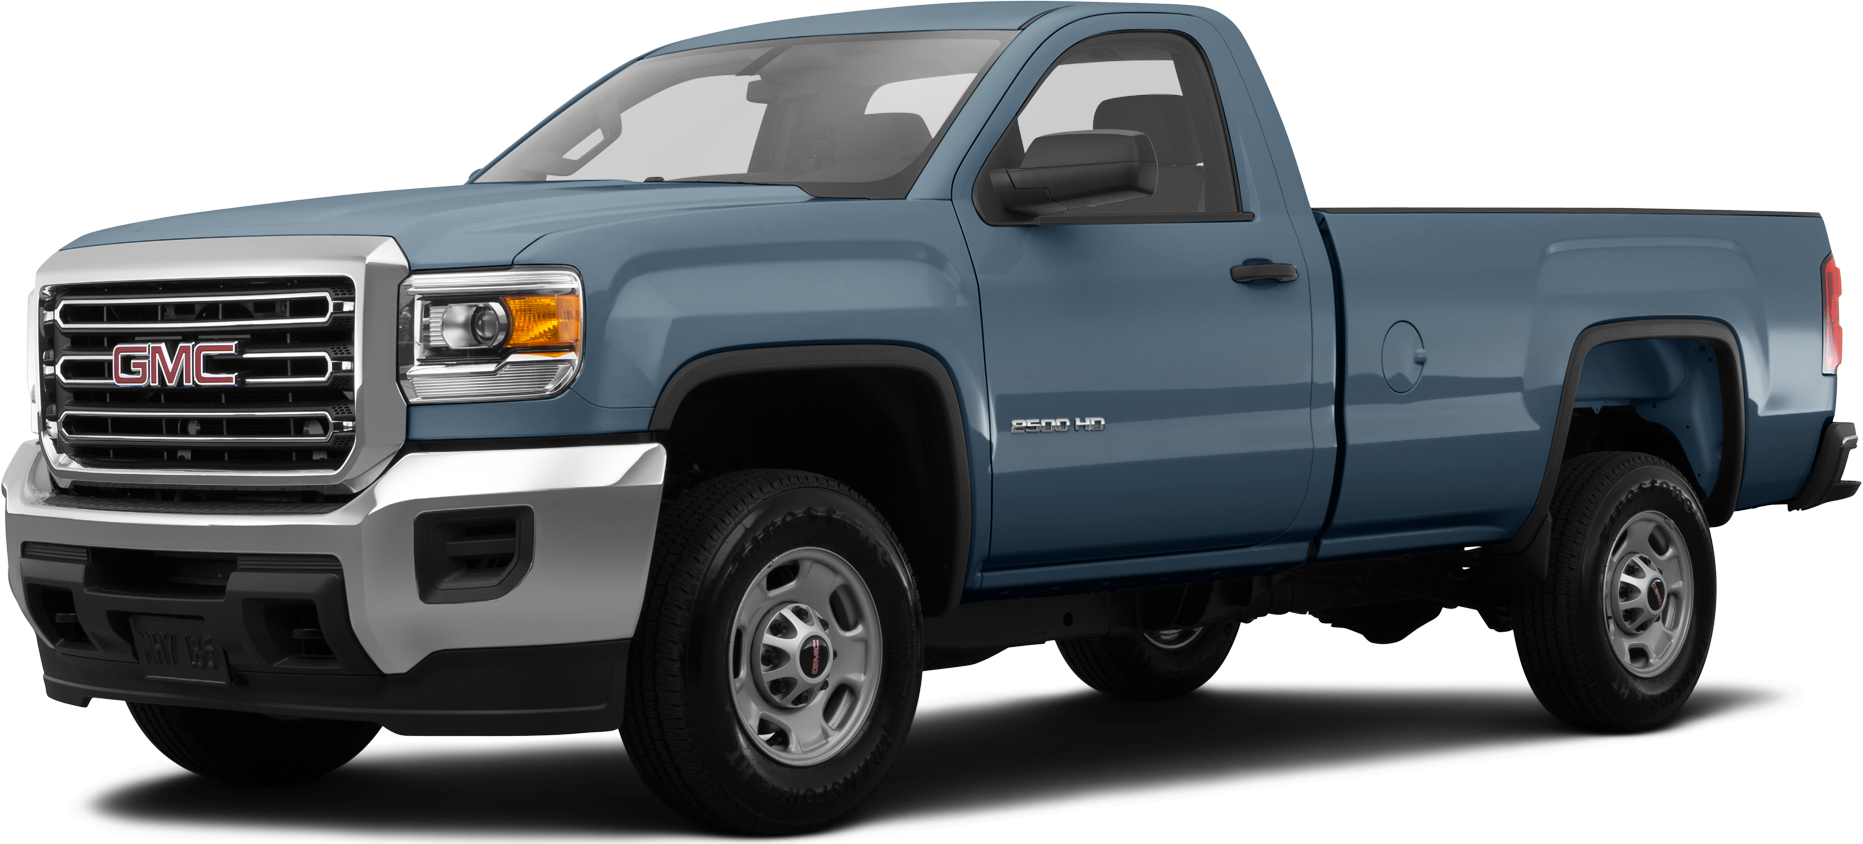 2015 Gmc Sierra 2500 Hd Regular Cab Price Value Ratings And Reviews